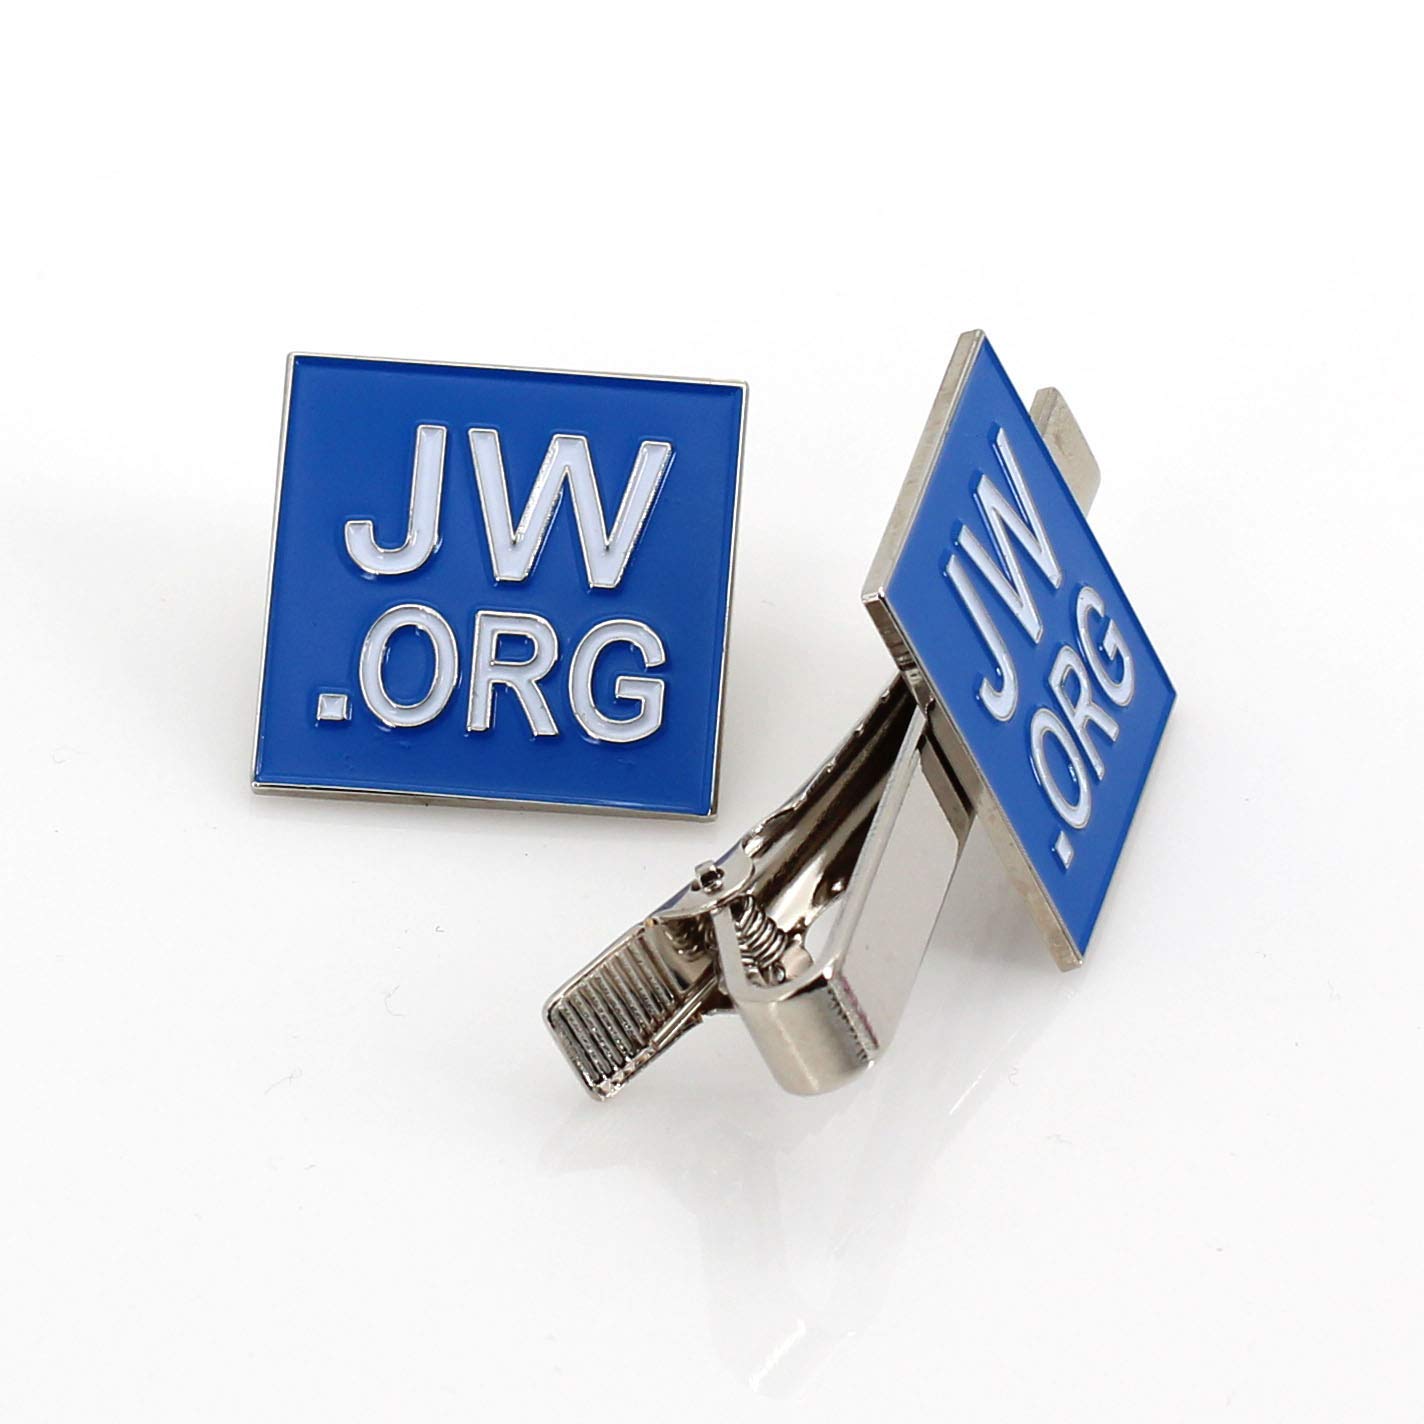 JW Logo - Perfect Present Jw.org Gift Necktie Clip And Lapel Pin Set Square With JW.ORG Logo Gift Box Blue